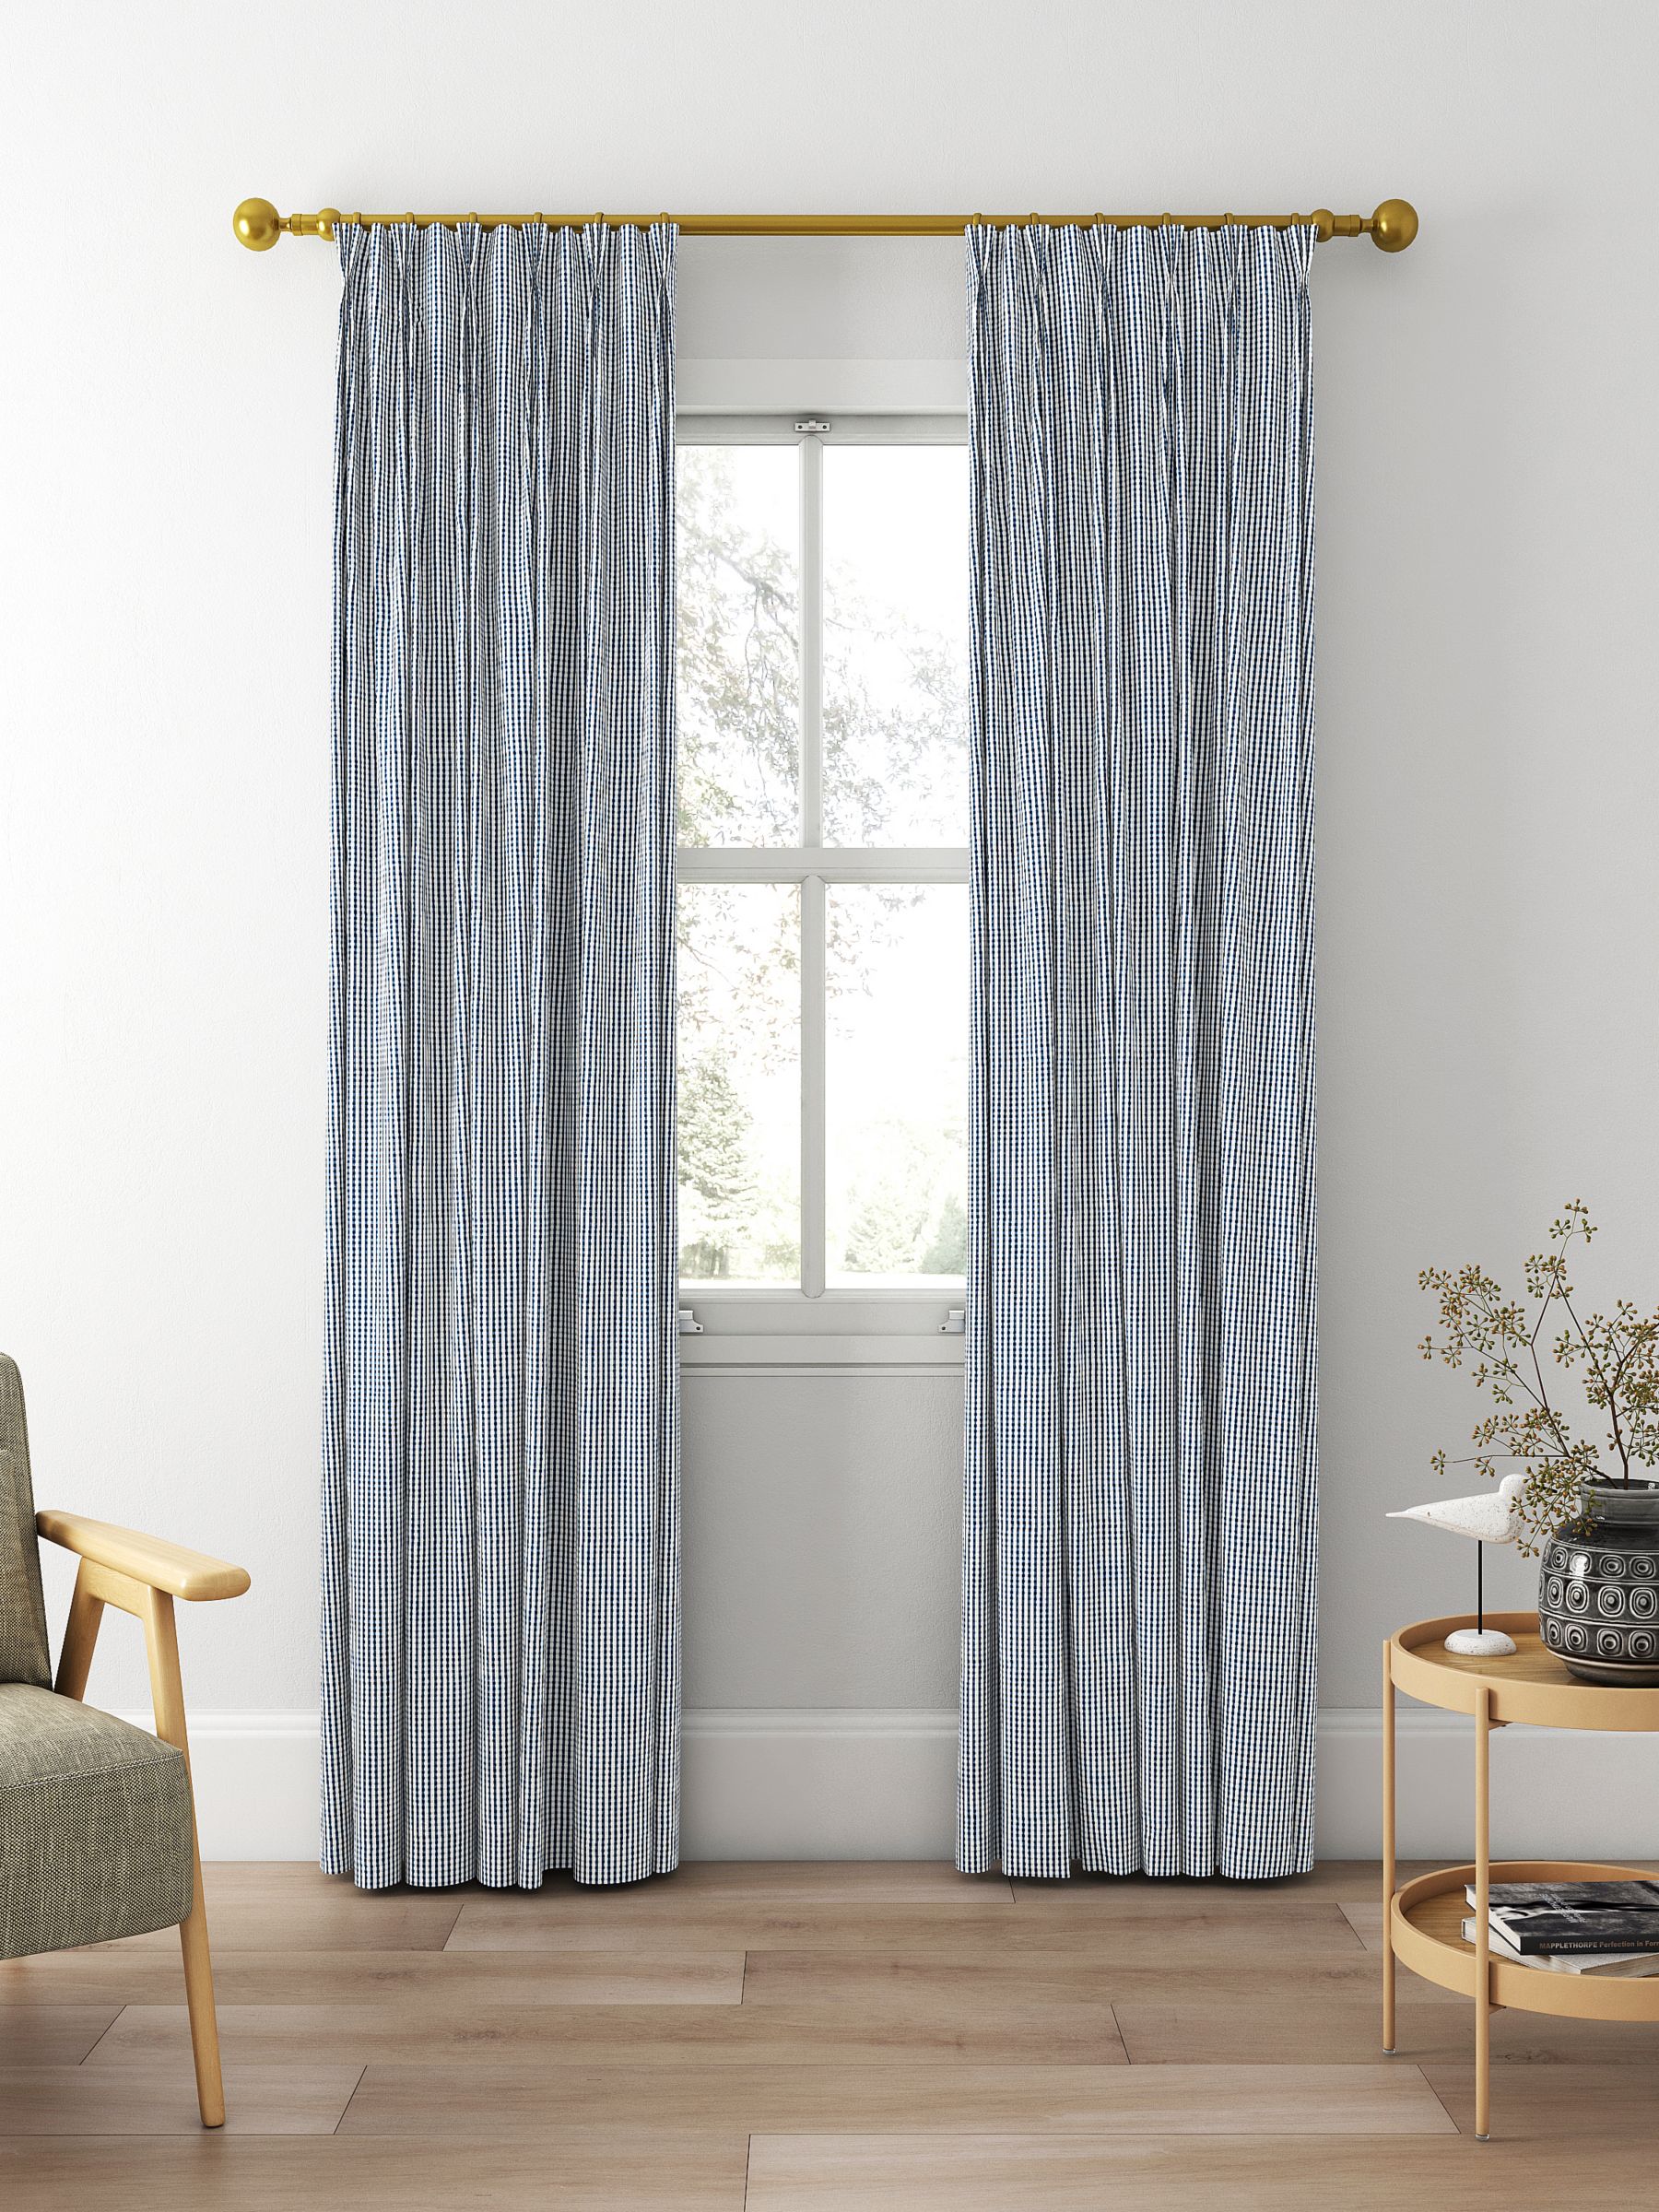 Clarke & Clarke Windsor Made to Measure Curtains, Navy